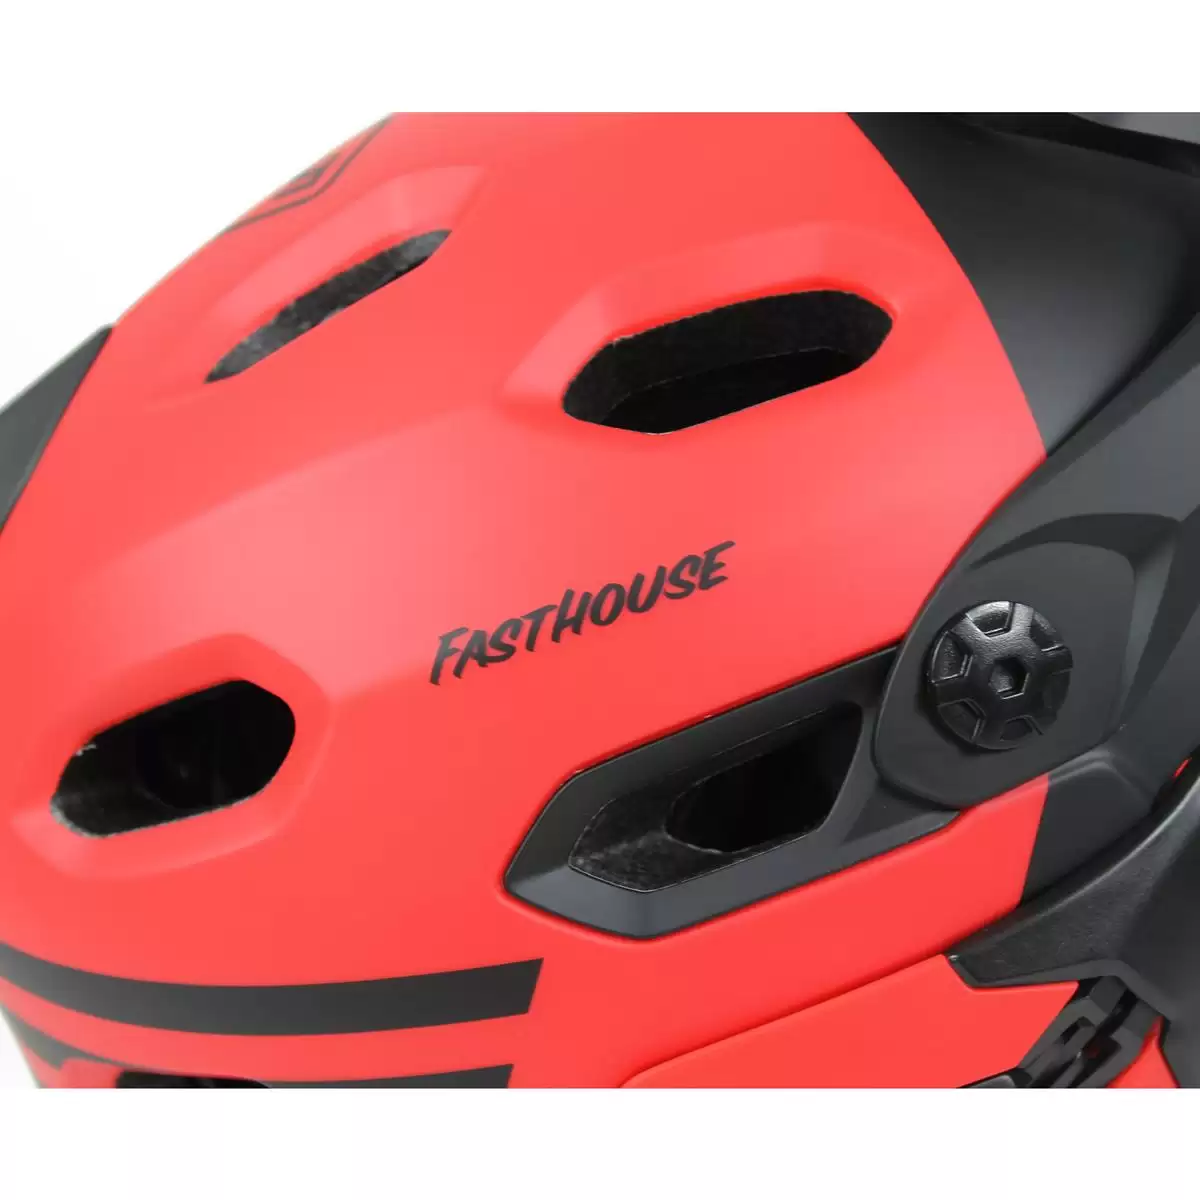 Helmet Super DH MIPS Fasthouse Red Size S (52-56cm) #5